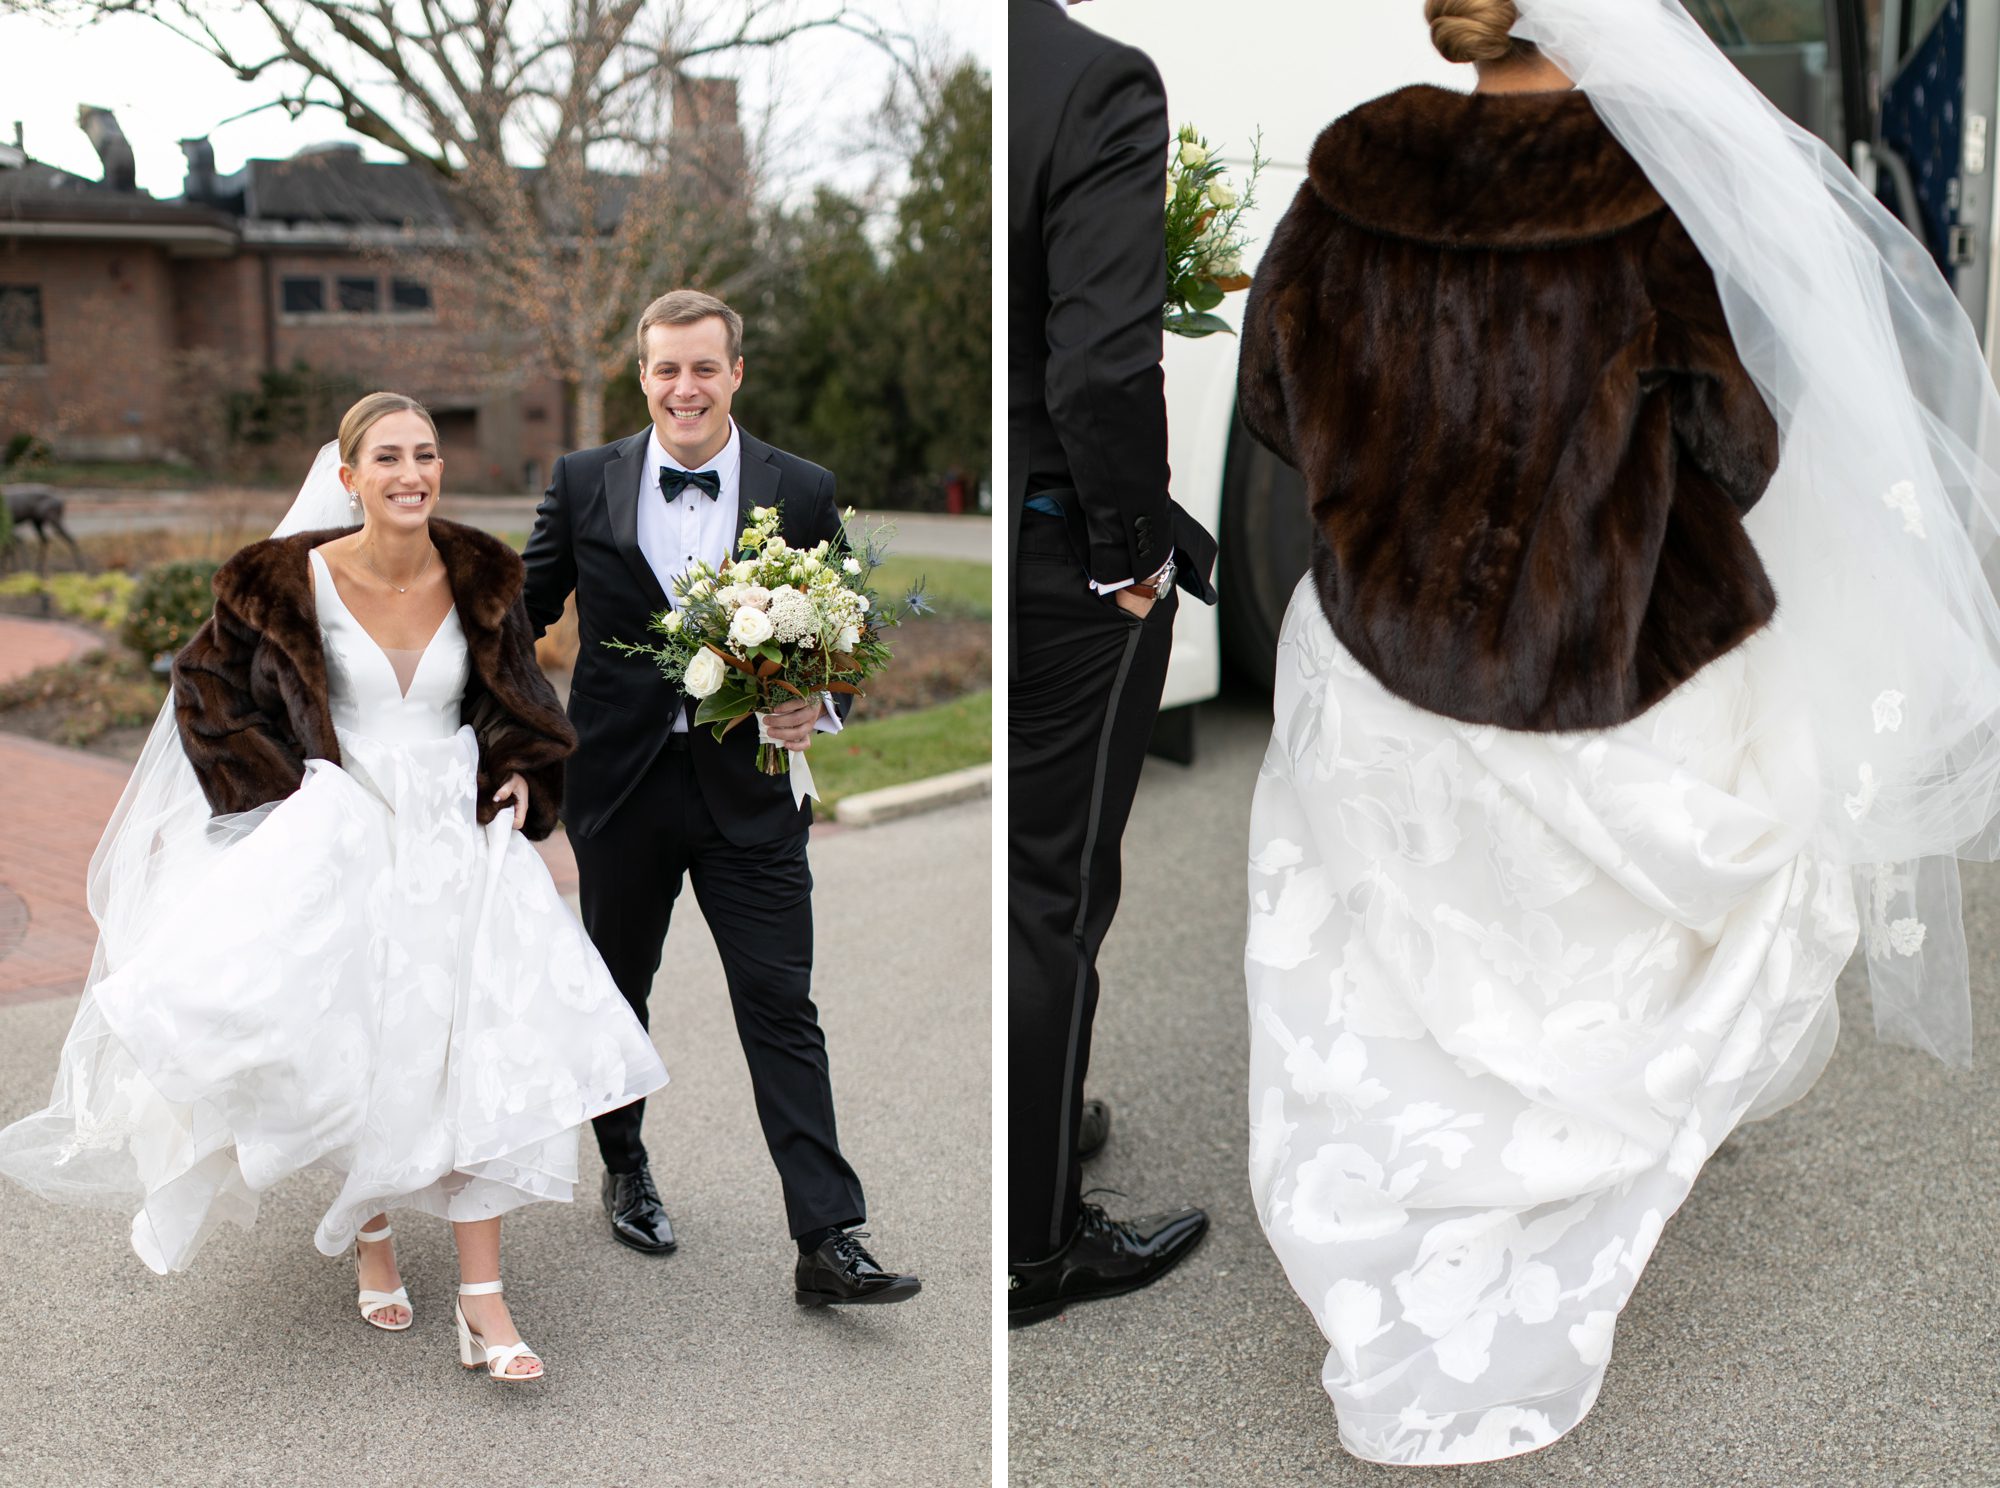 the bride and groom had a gorgeous Chicago winter wedding